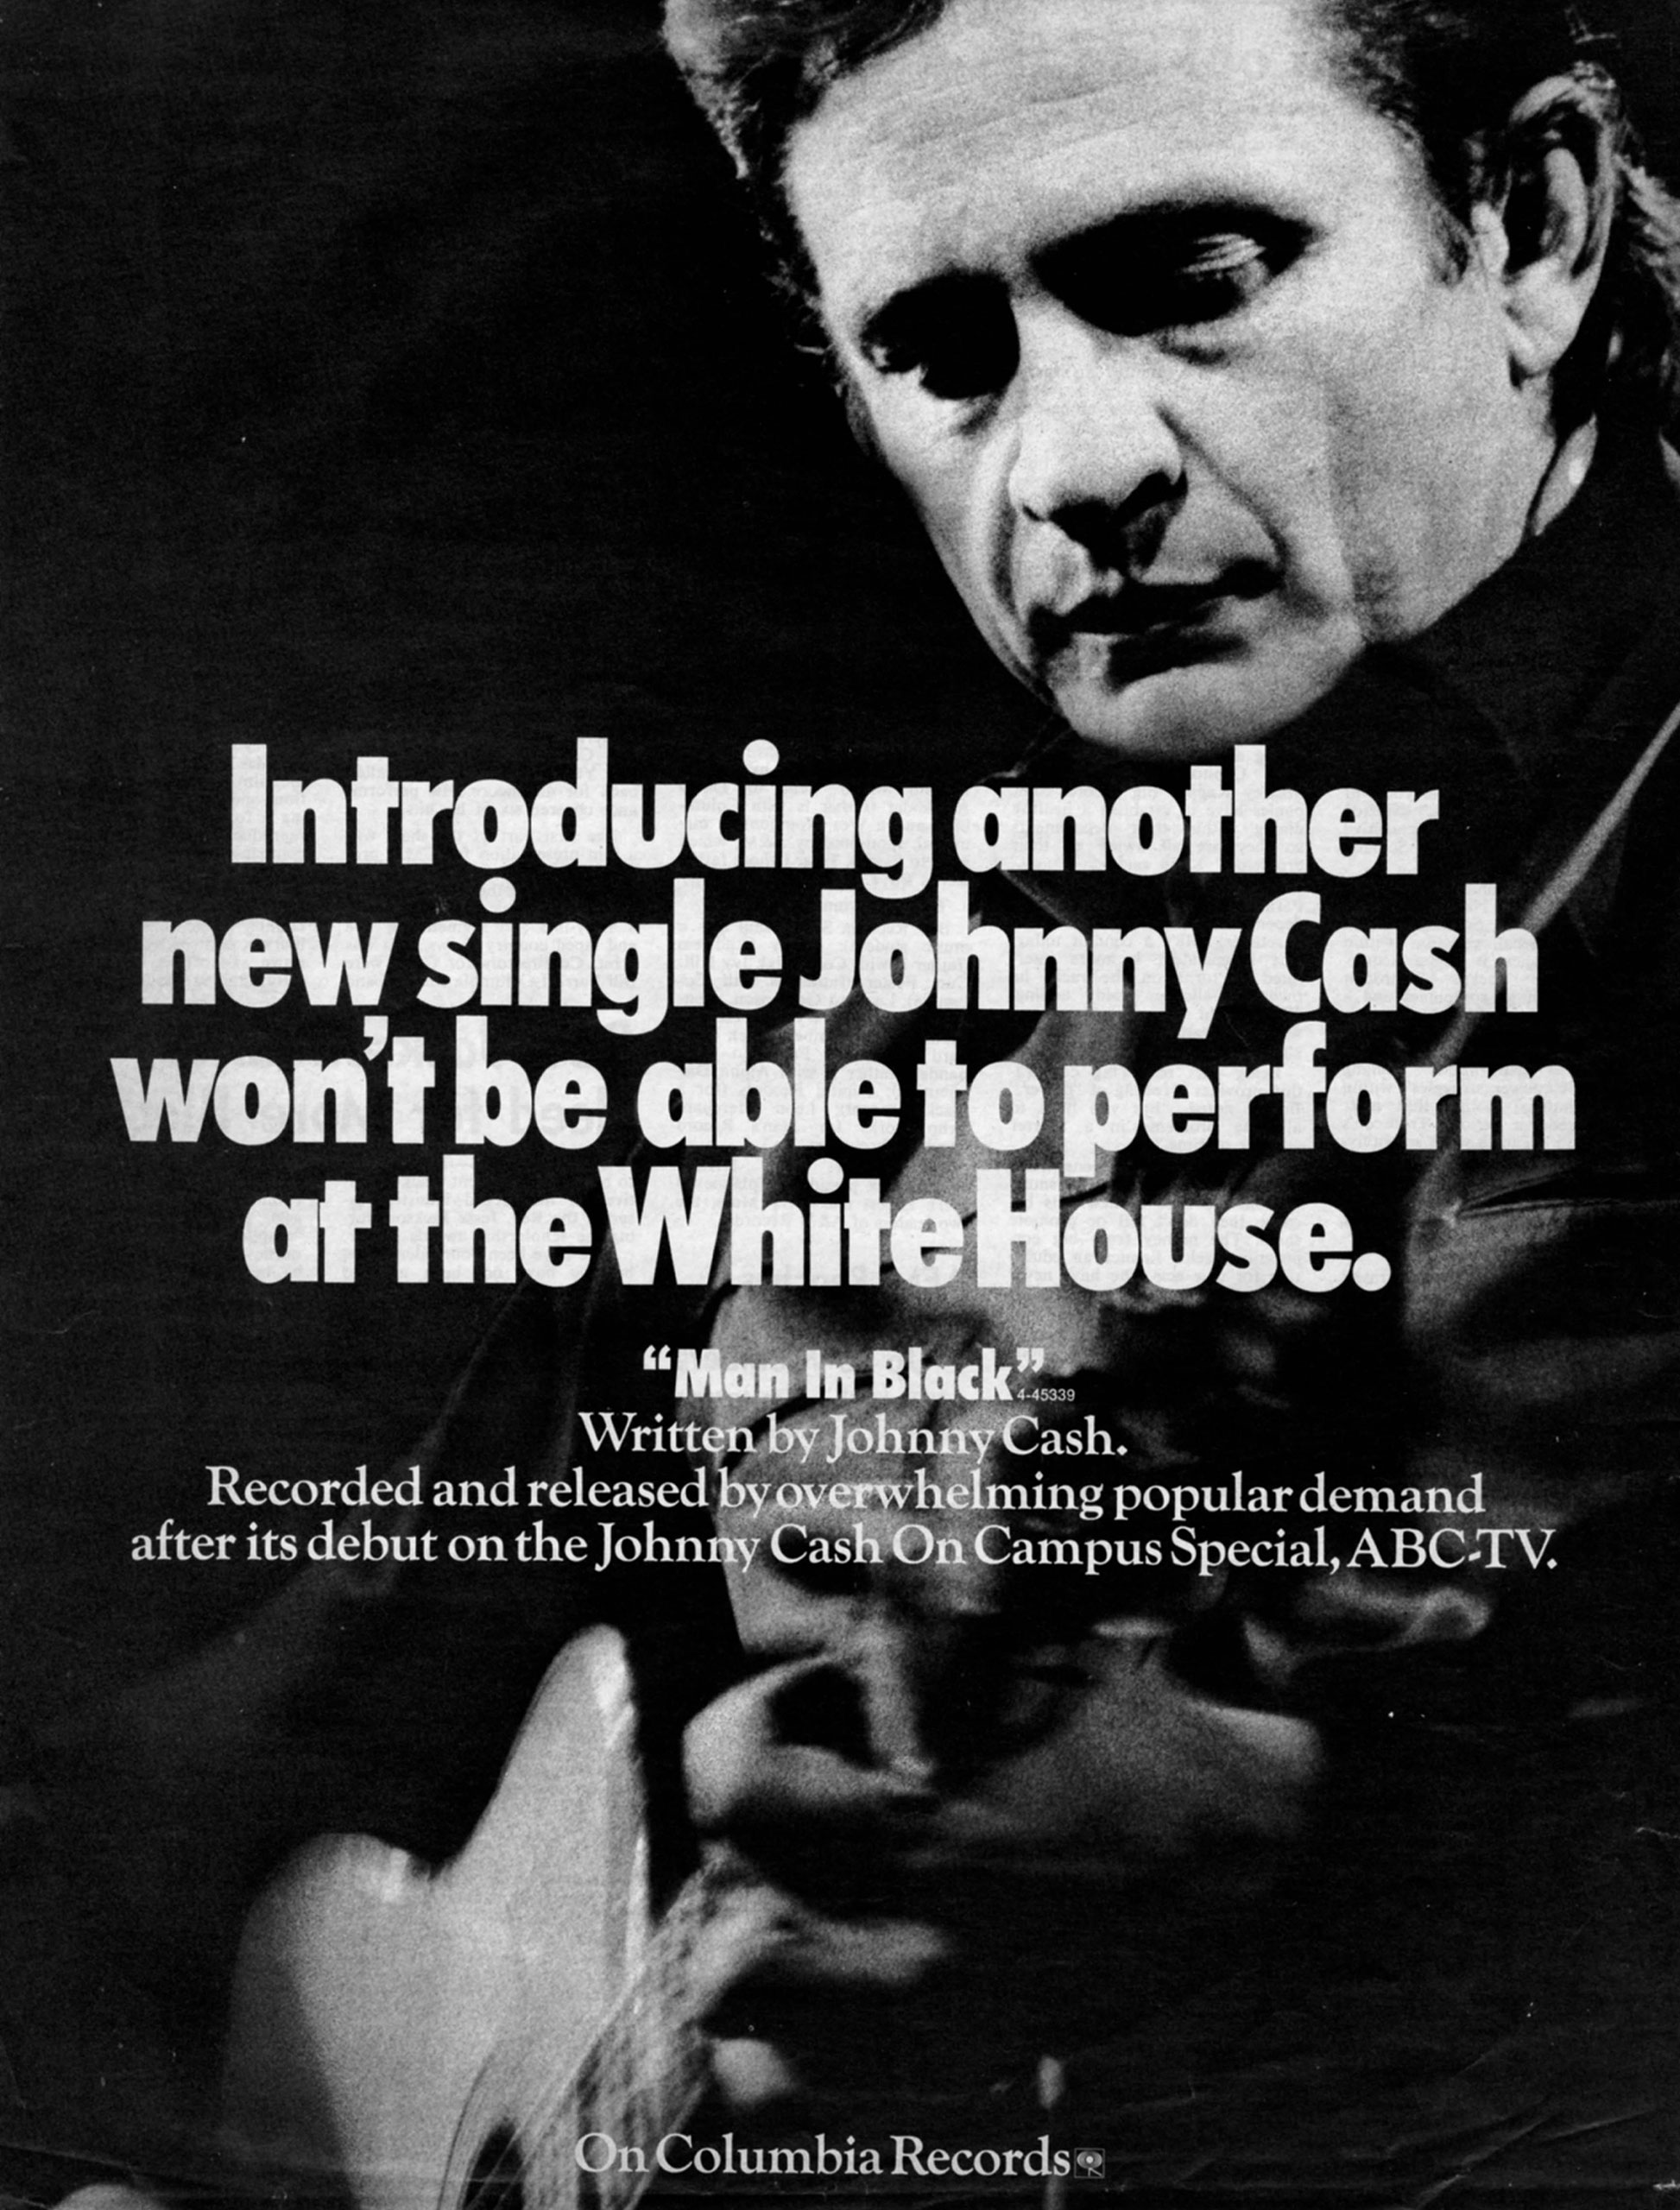 Advertisement for Johnny Cash’s single “Man in Black.”